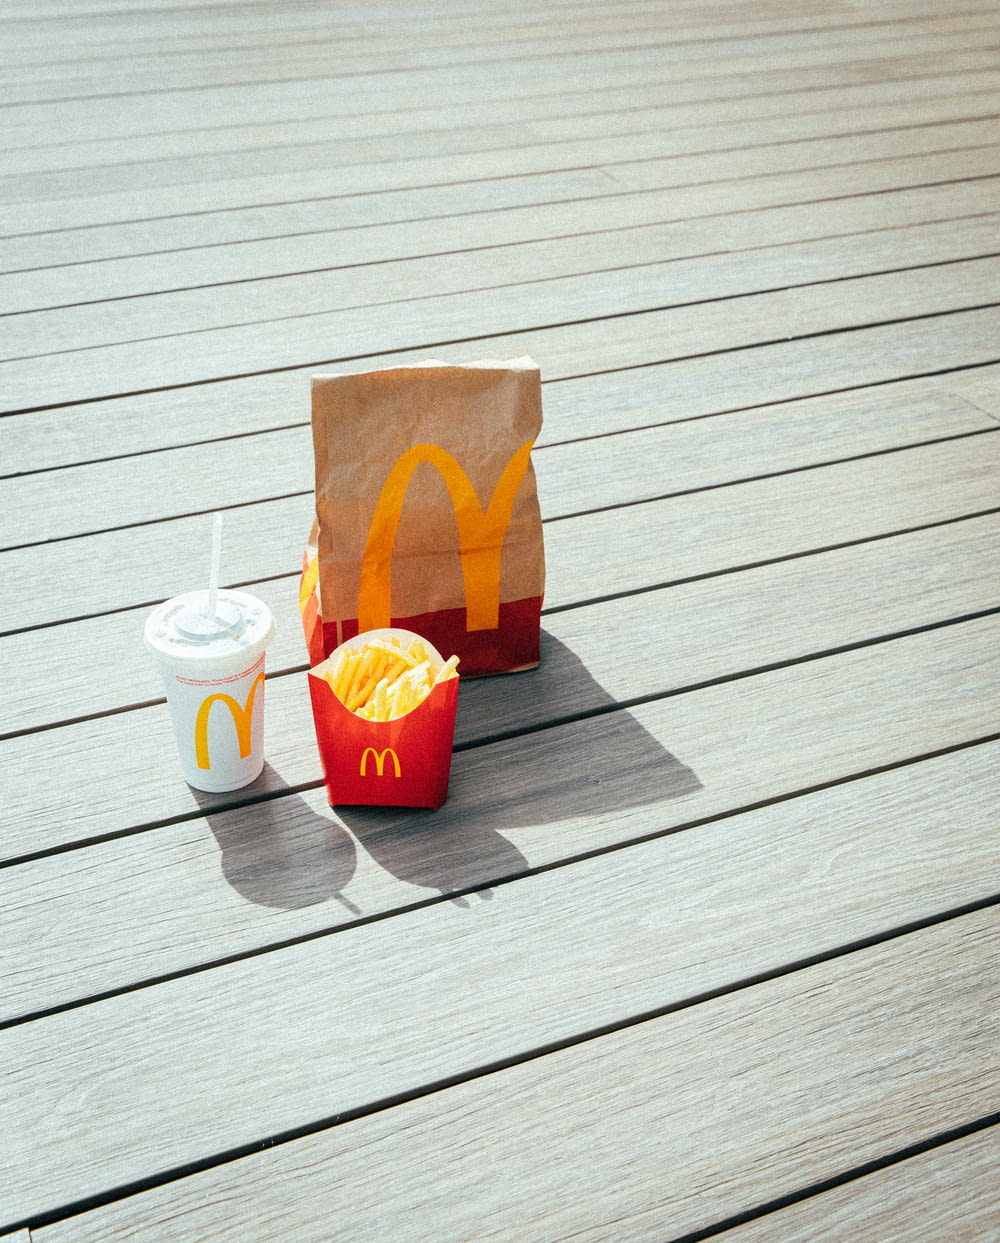 a mcdonald's bag sitting on a wooden deck next to a cup of coffee